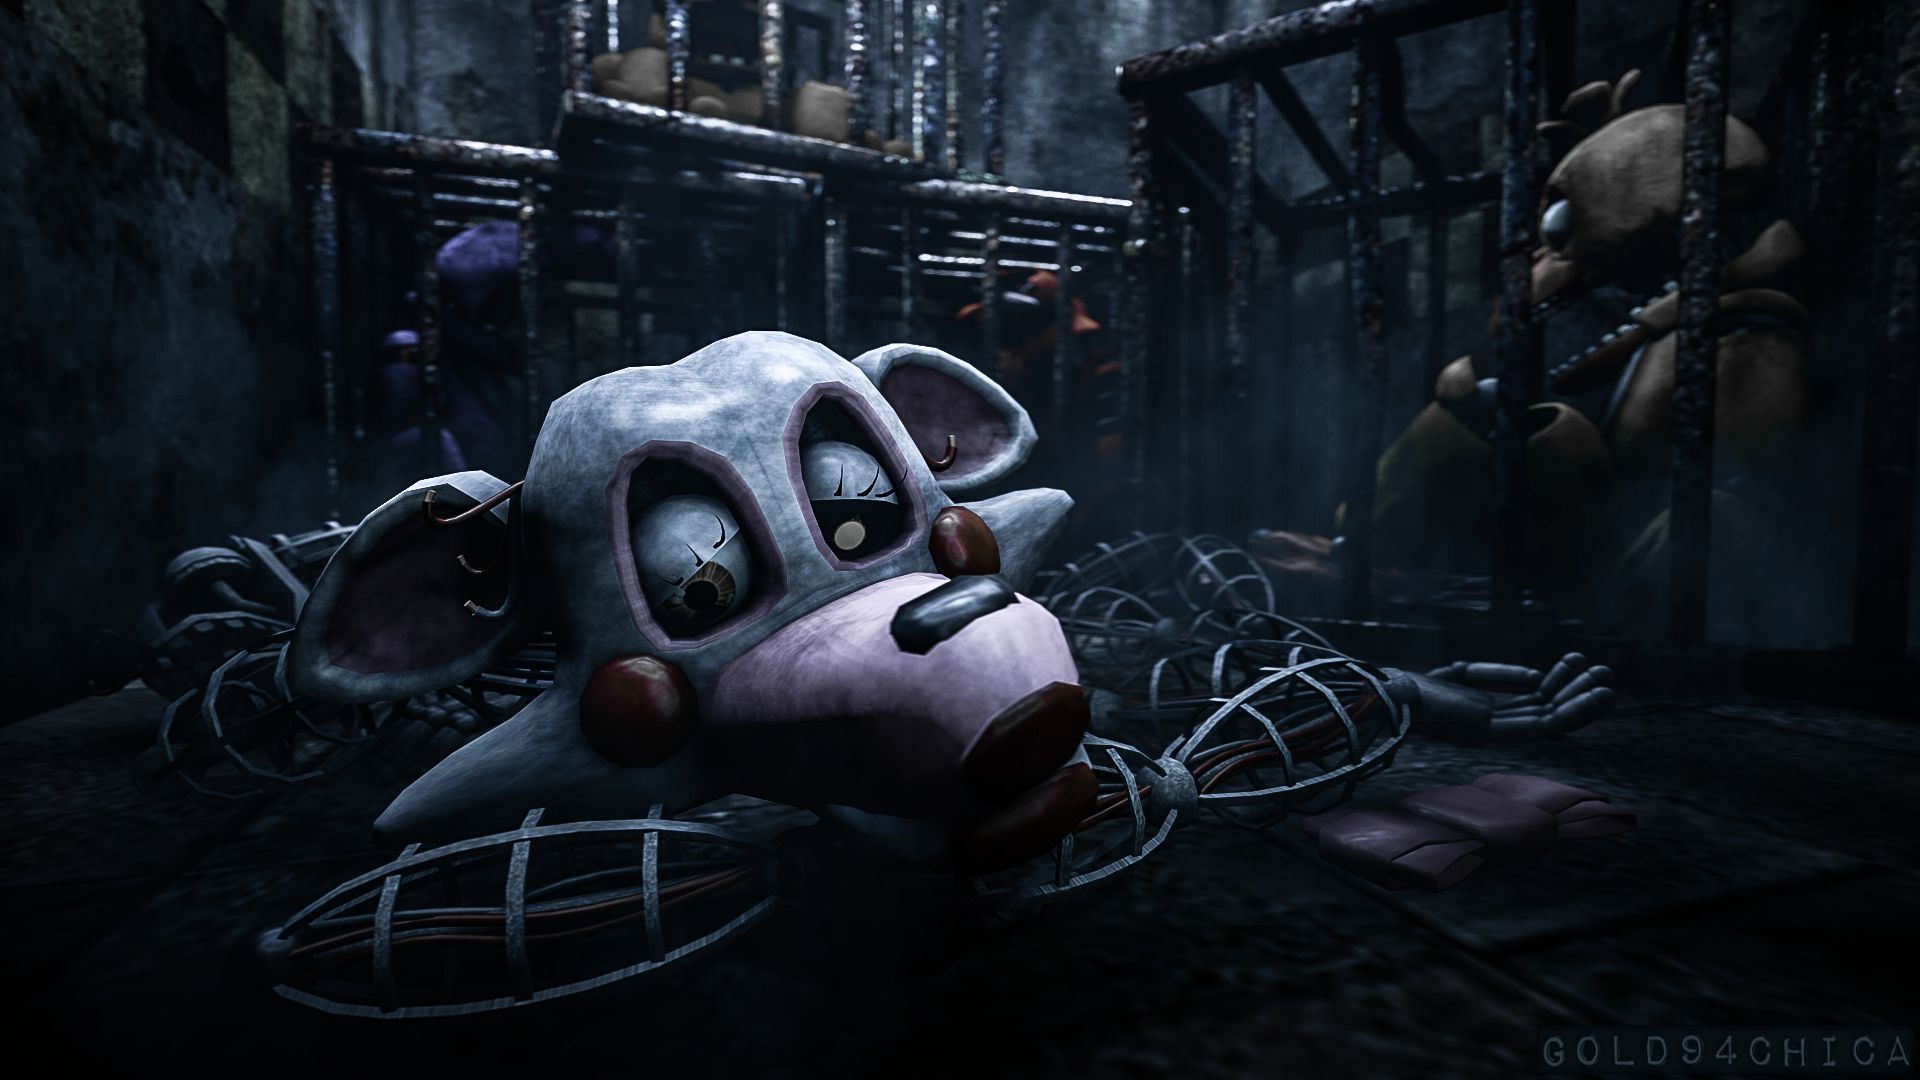 Five Nights at Freddy's 2 - Download for PC Free